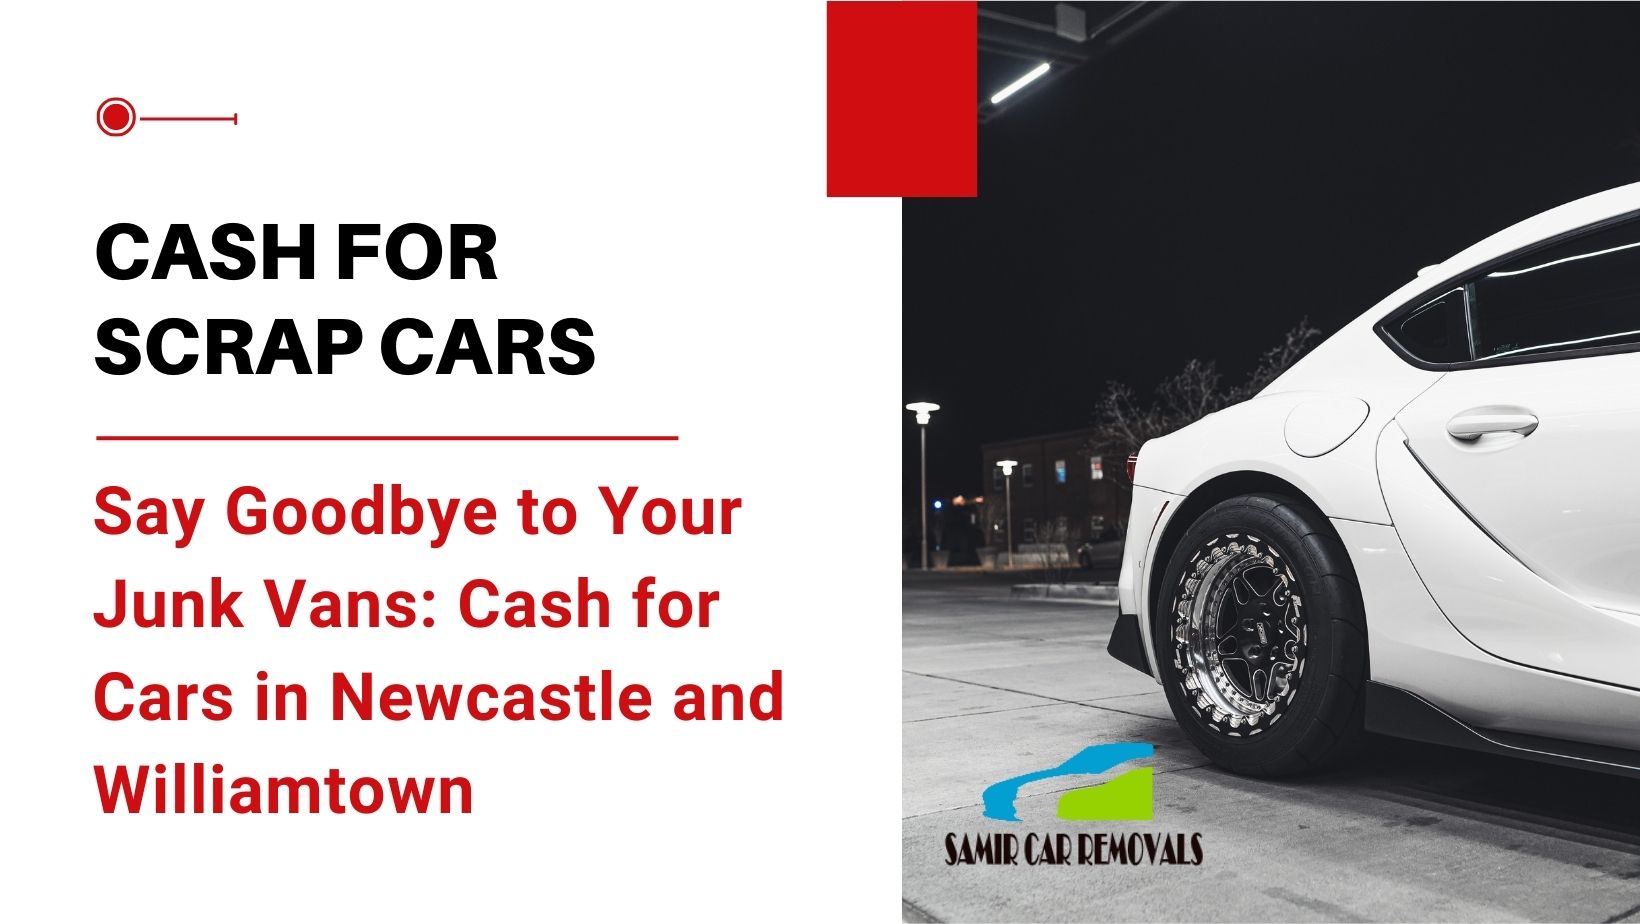 Say Goodbye to Your Junk Vans: Cash for Cars in Newcastle and Williamtown